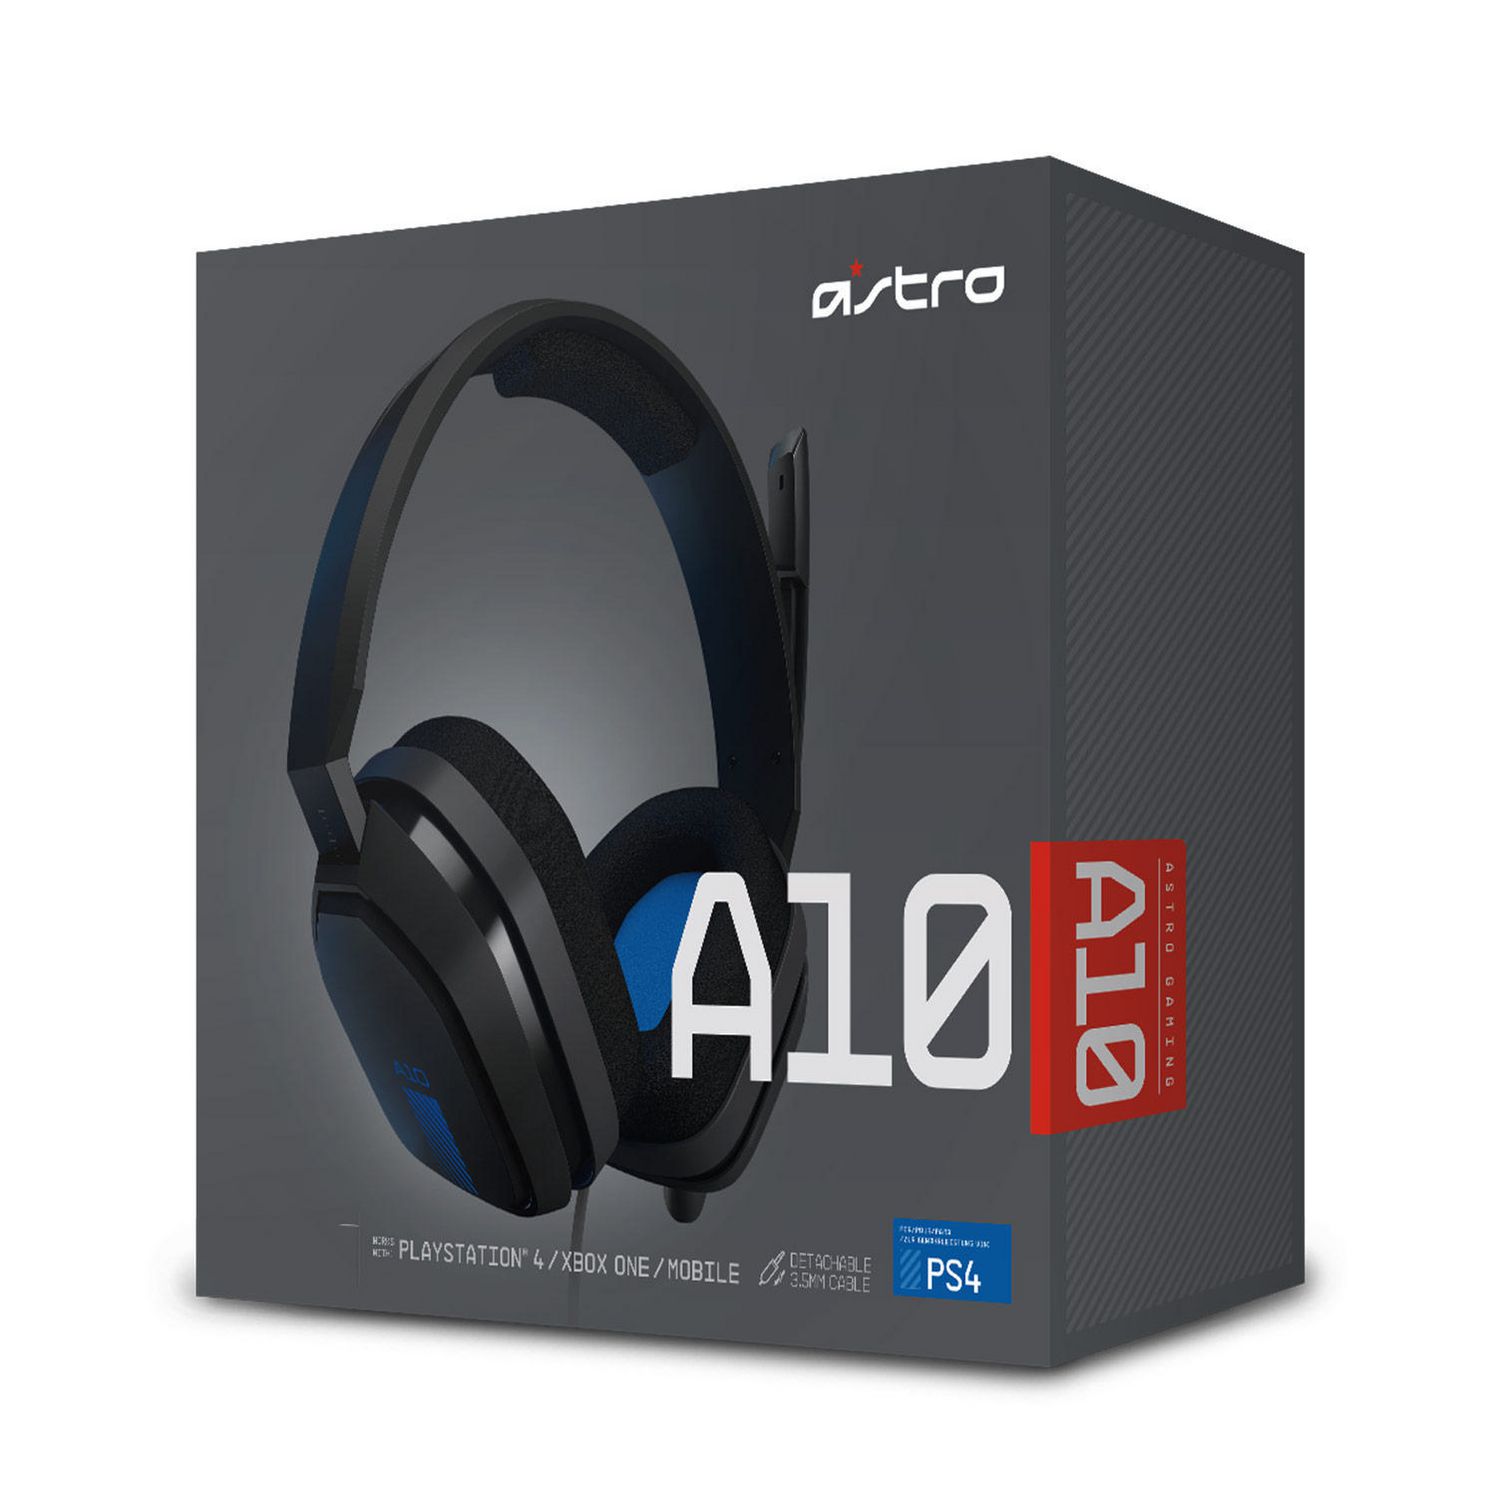 a 10 headset ps4